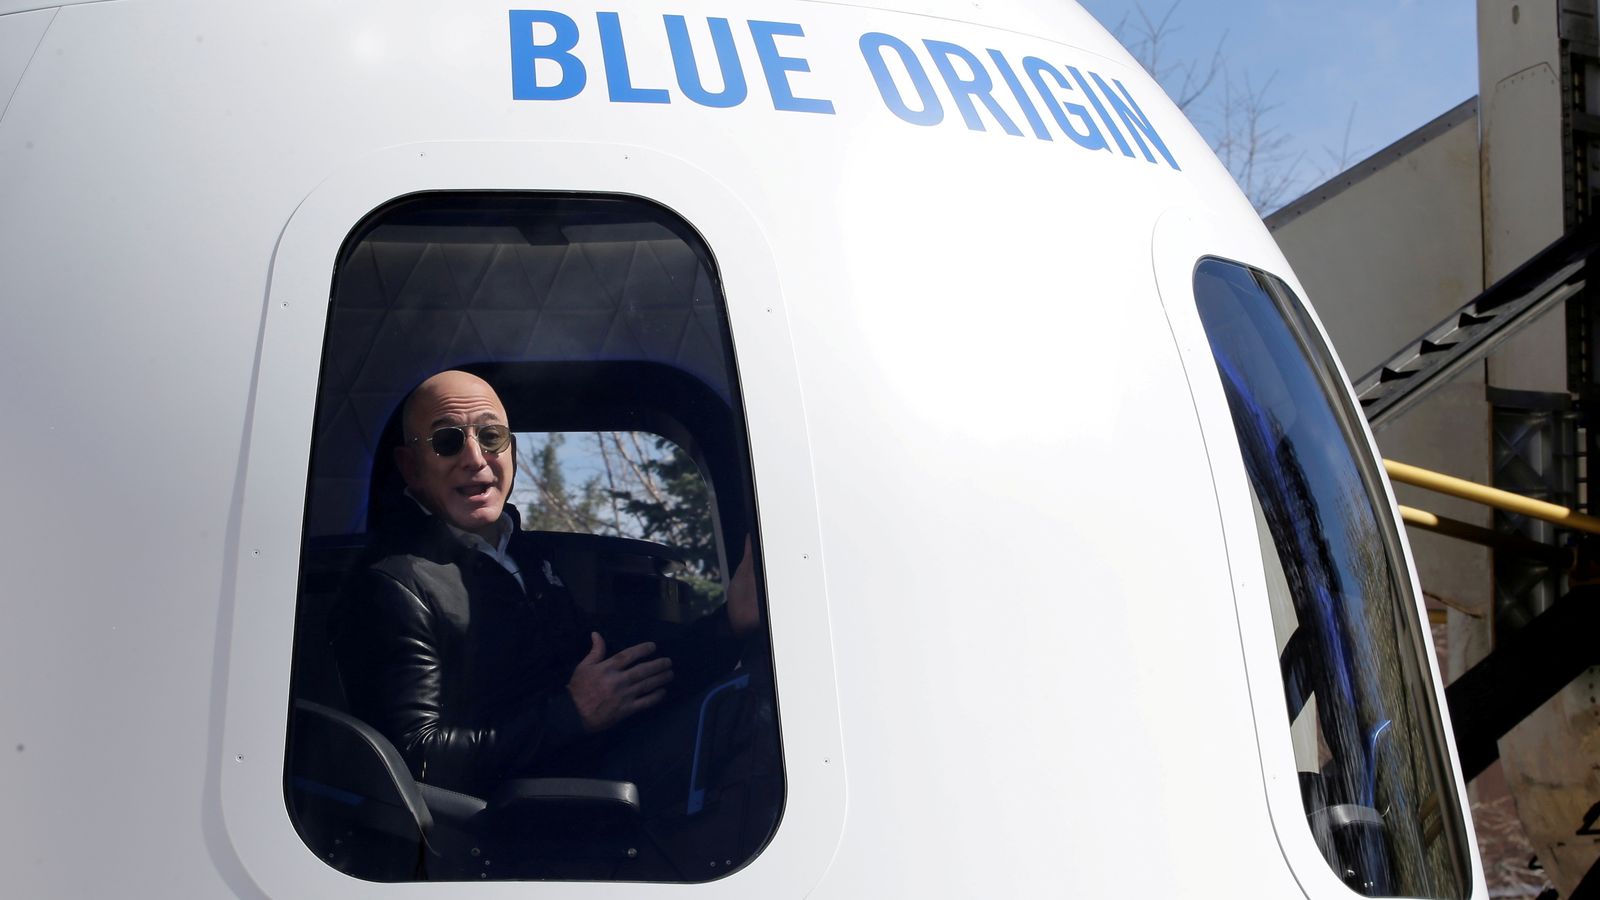 Jeff Bezos: Amazon founder ‘excited not nervous’ about flight to edge of space